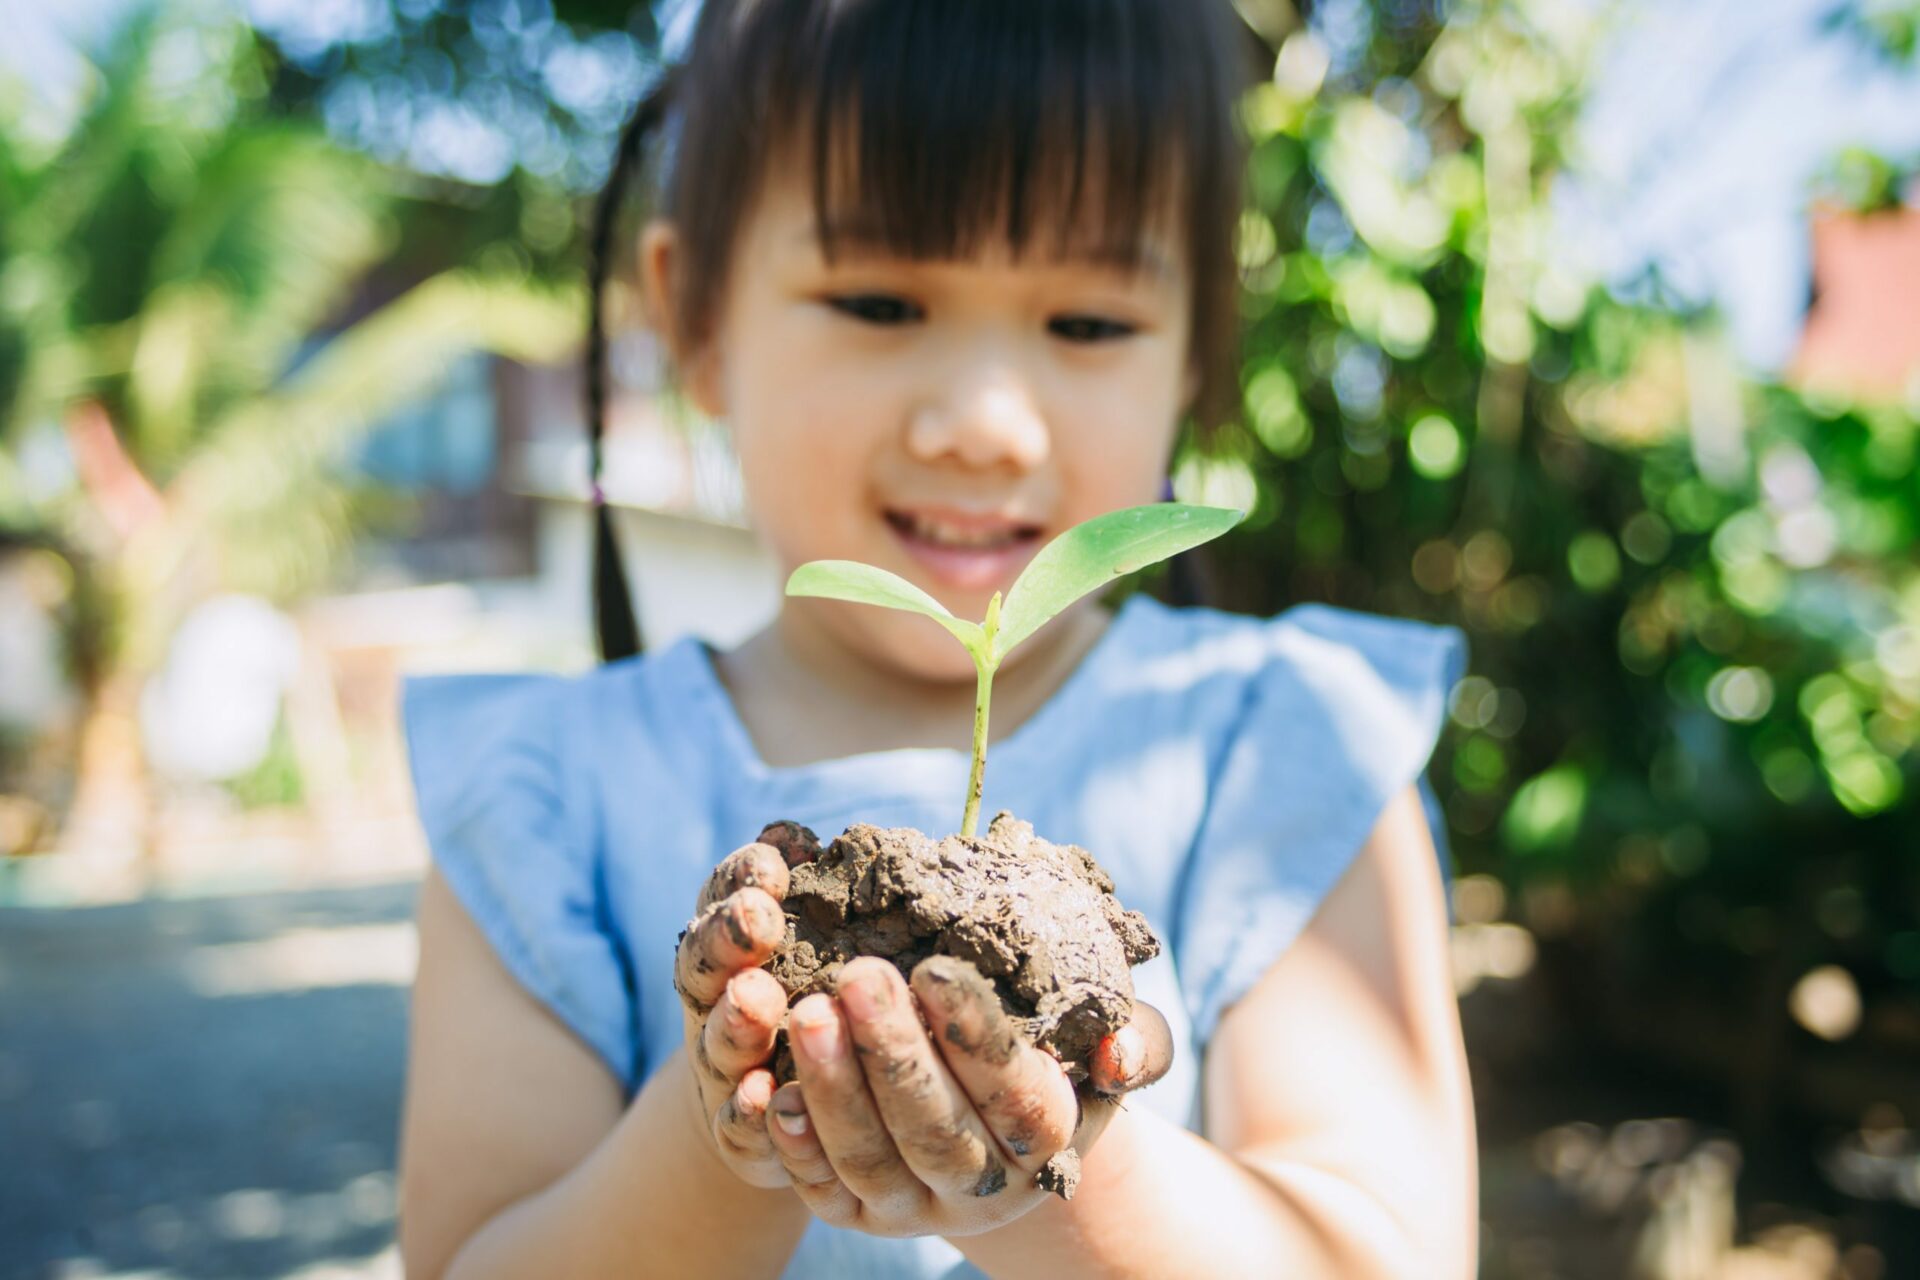 Cute kid planting a tree for help to prevent global warming or climate change and save the earth. Picture for concept of Earth Day to encourage people about the environmental protection.